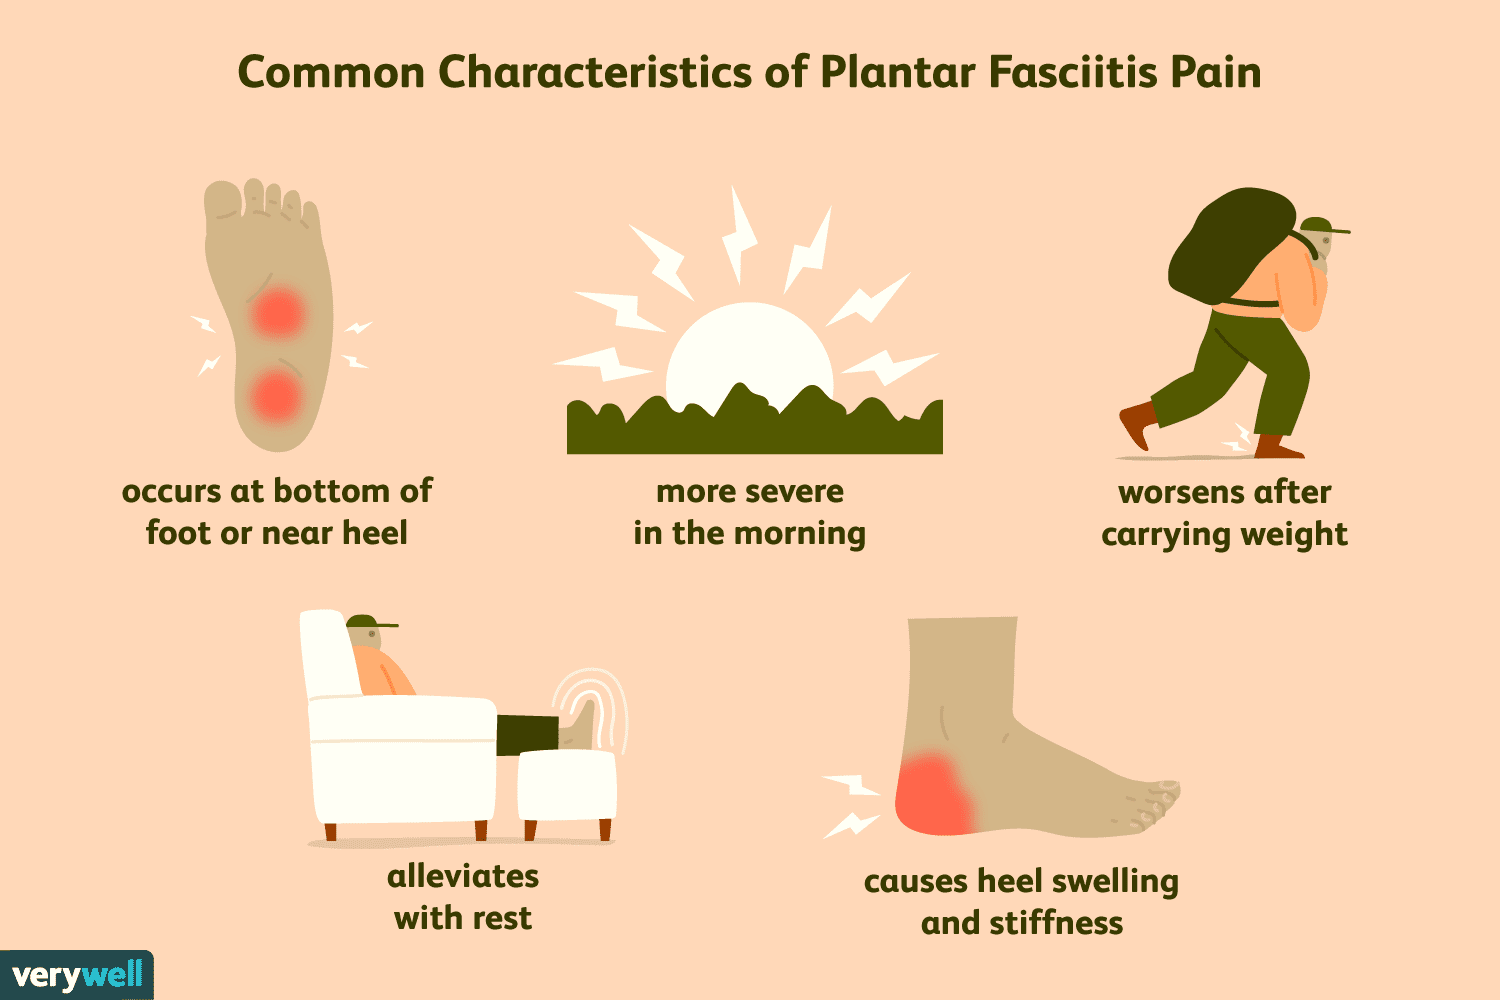 Plantar Fasciitis – Don’t let this common condition slow you down. There are treatment options